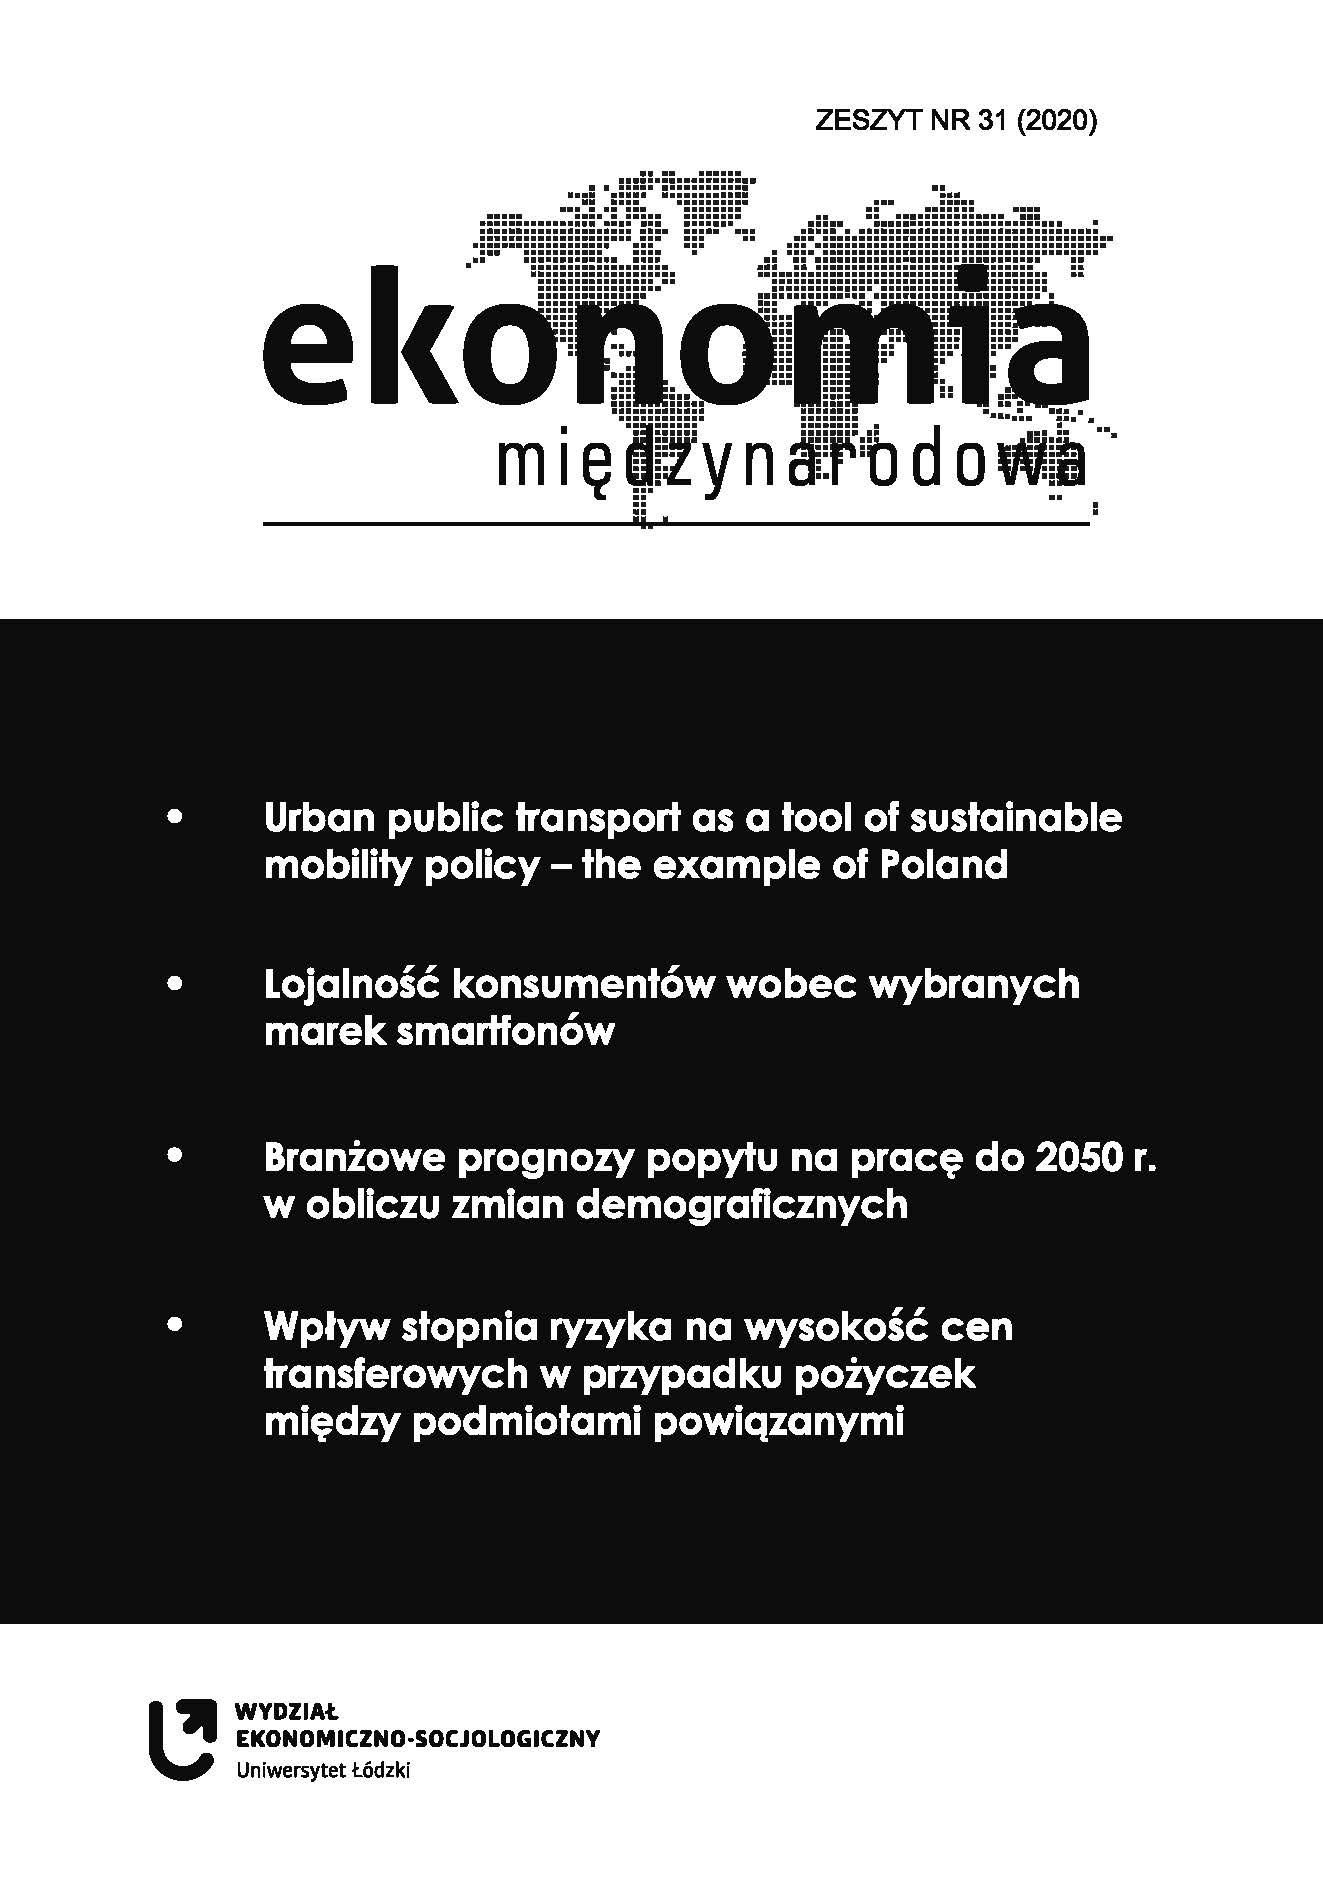 Urban public transport as a tool of sustainable mobility policy – the example of Poland Cover Image